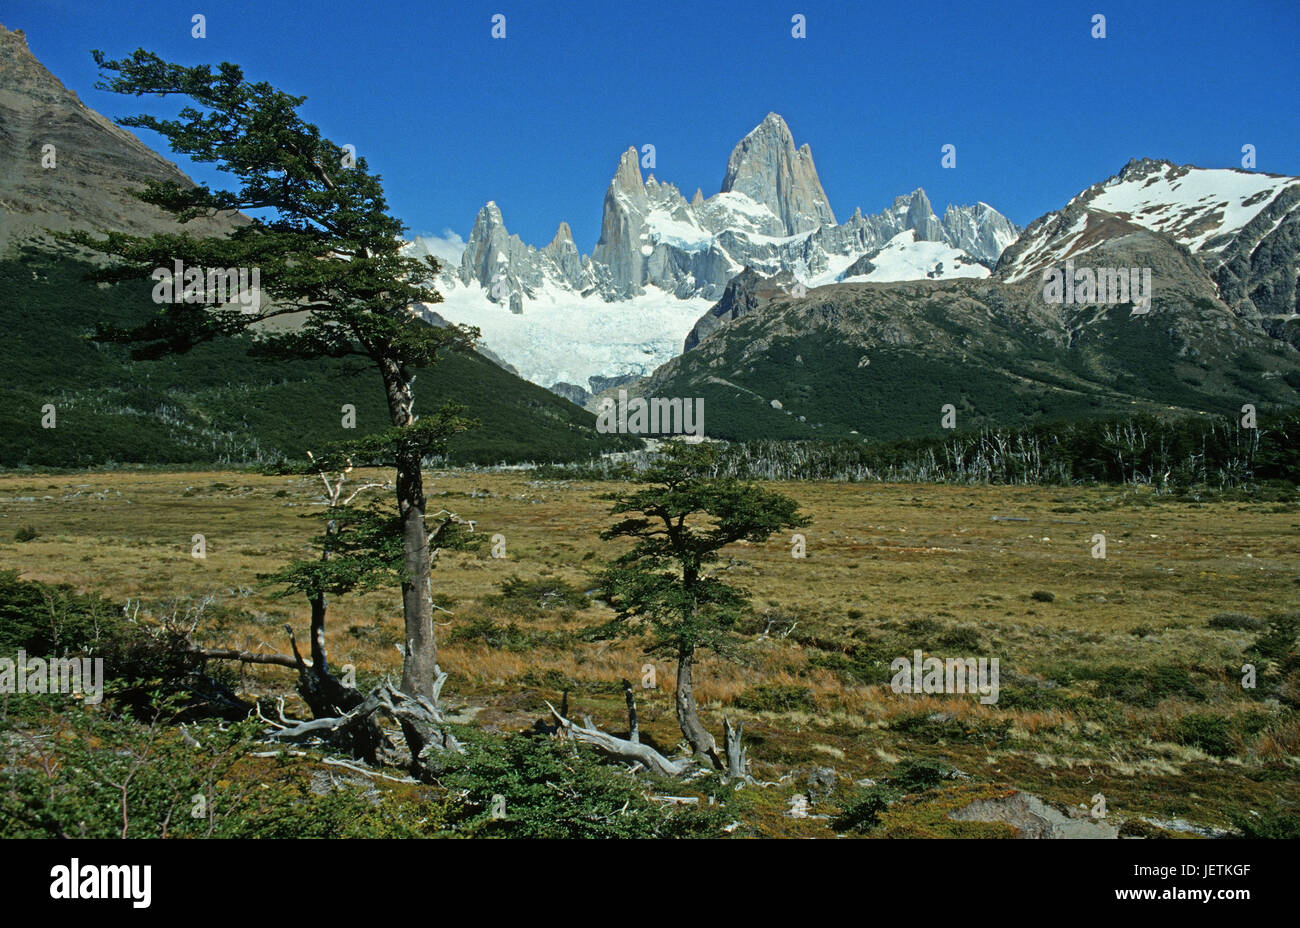 The summit of the Fitz Roy, Patagonia, Argentina, Der Gipfel des Fitz Roy - Patagonien, Argentinien Stock Photo